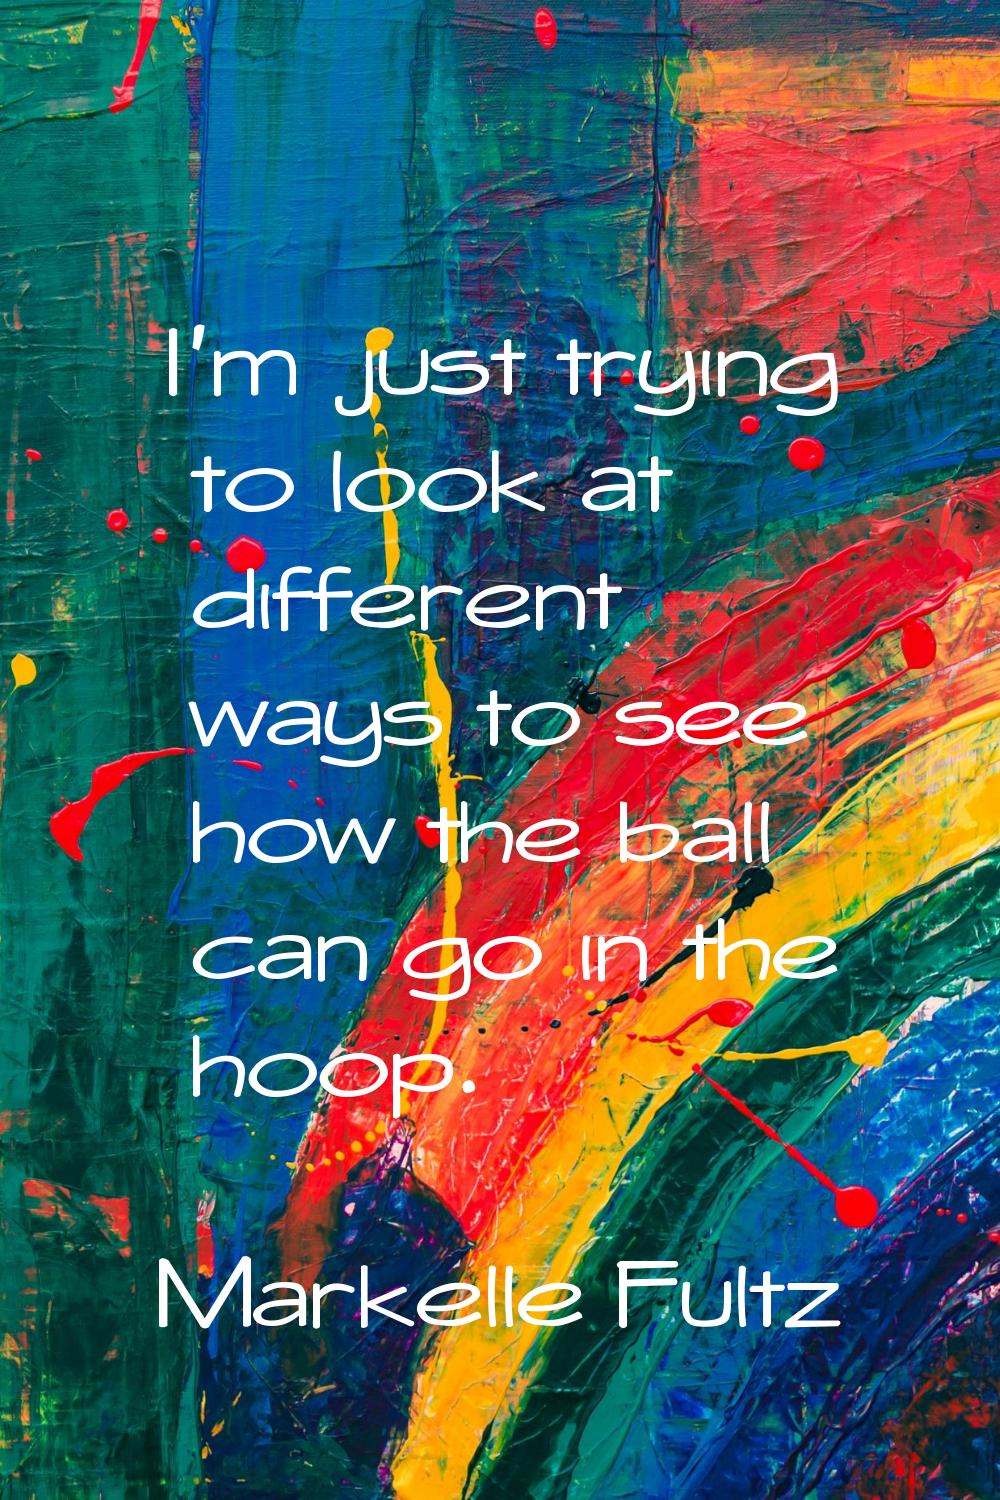 I'm just trying to look at different ways to see how the ball can go in the hoop.